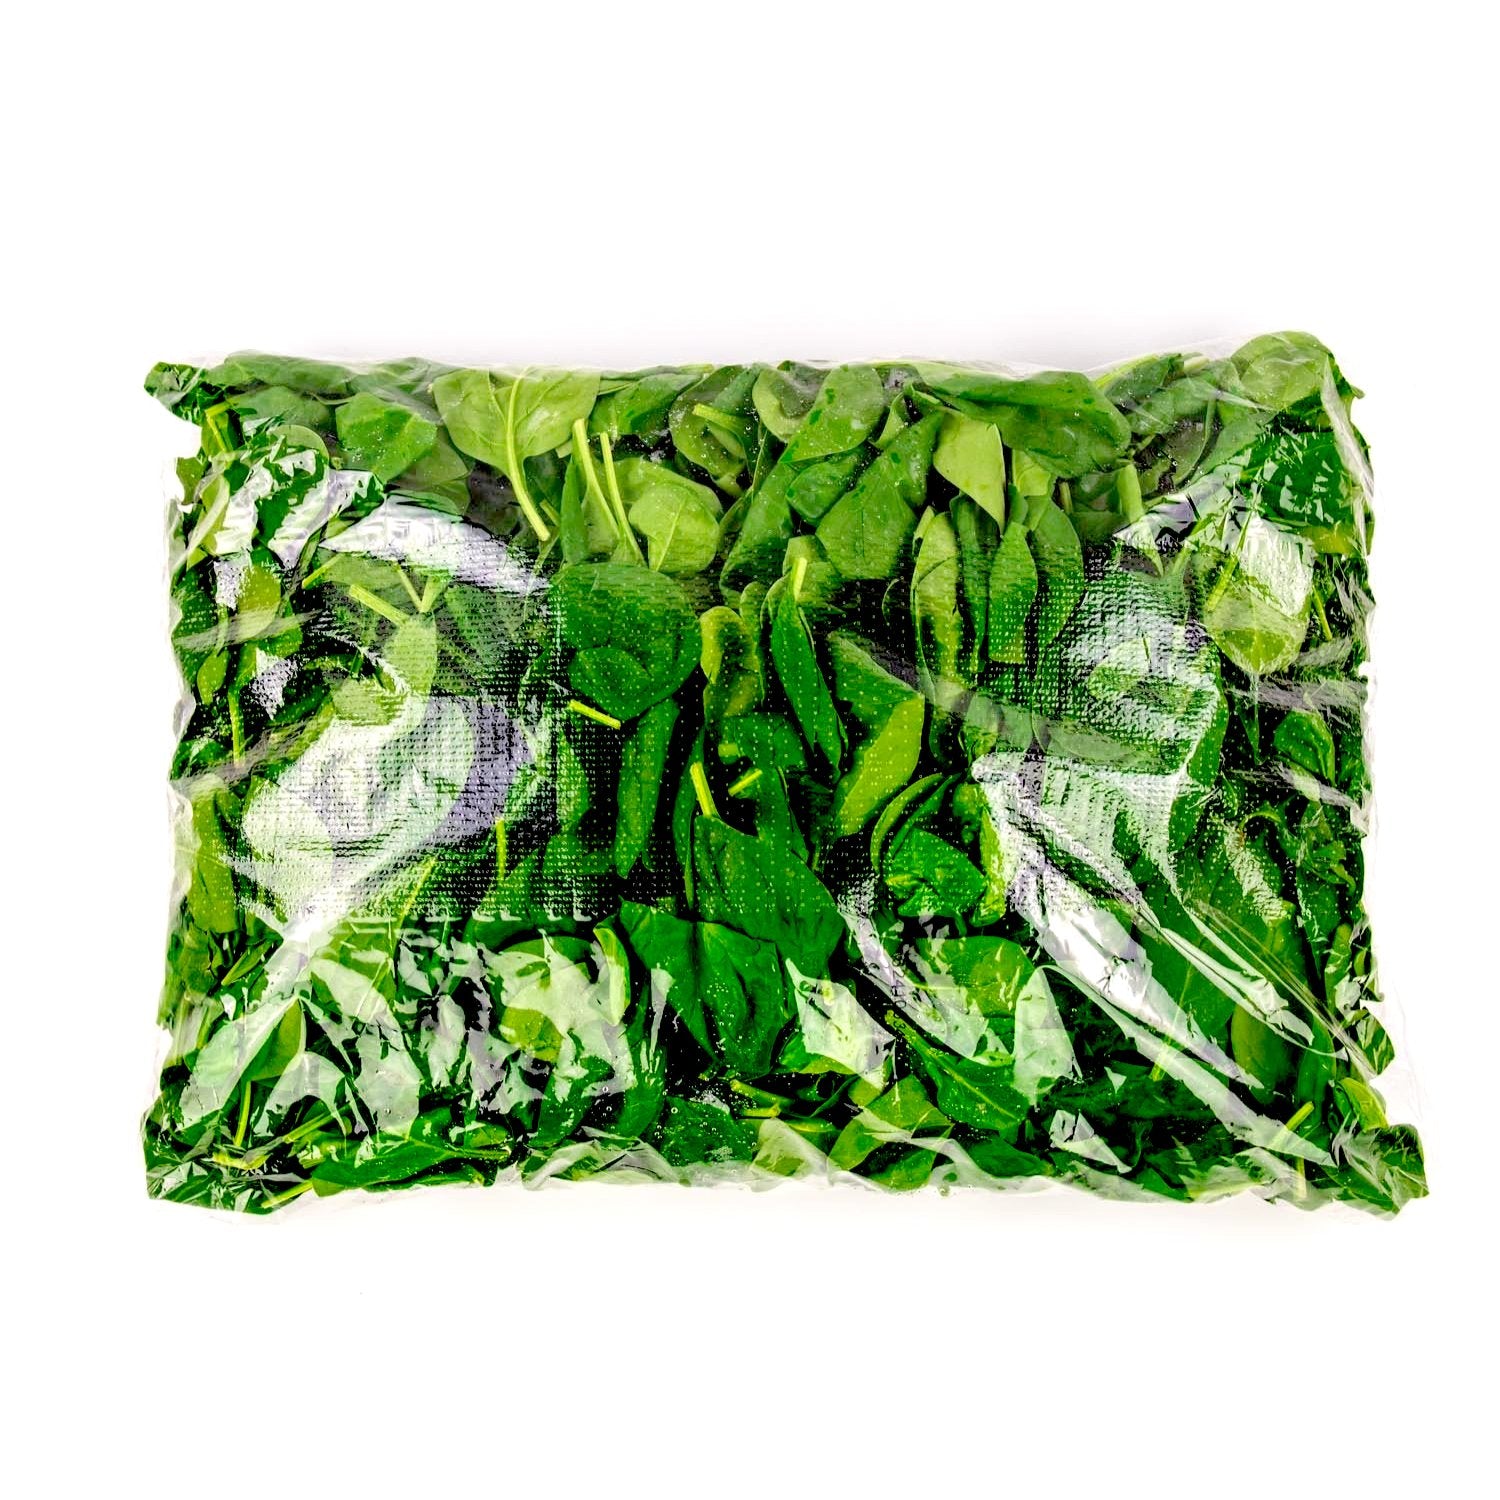 2LBS Bag - Baby Spinach SPECIAL!